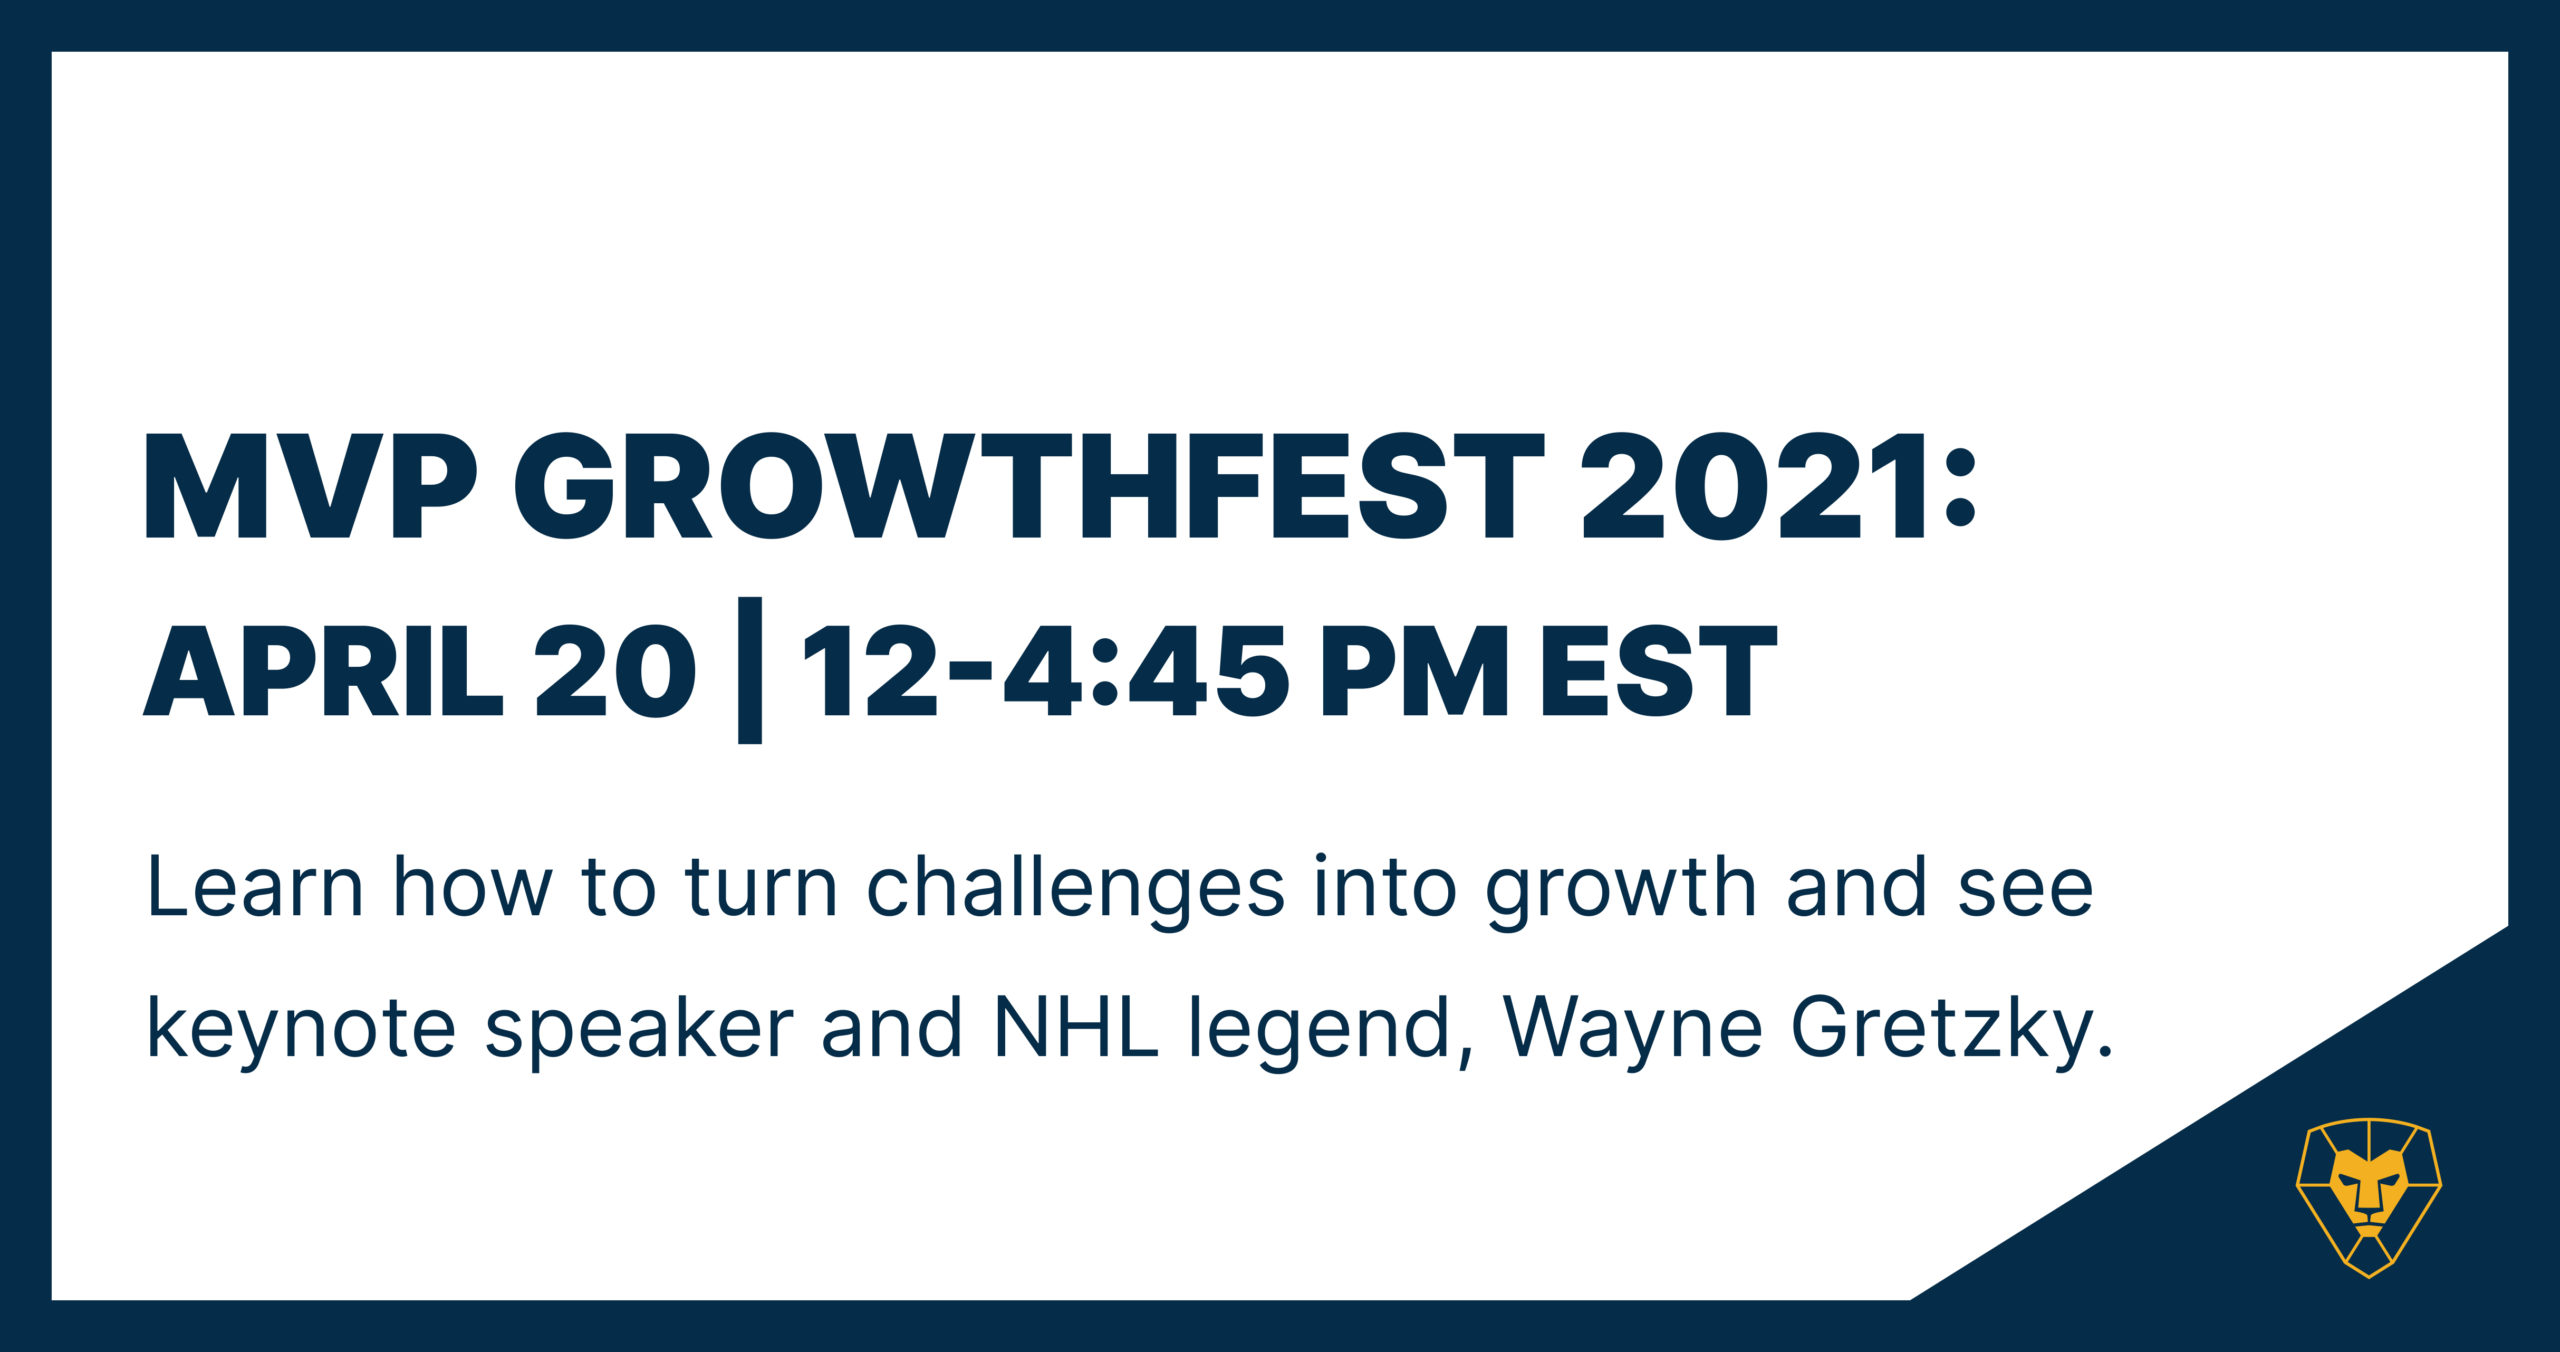 MVP Growthfest 2021 - Turn challenges into growth with Wayne Gretzky